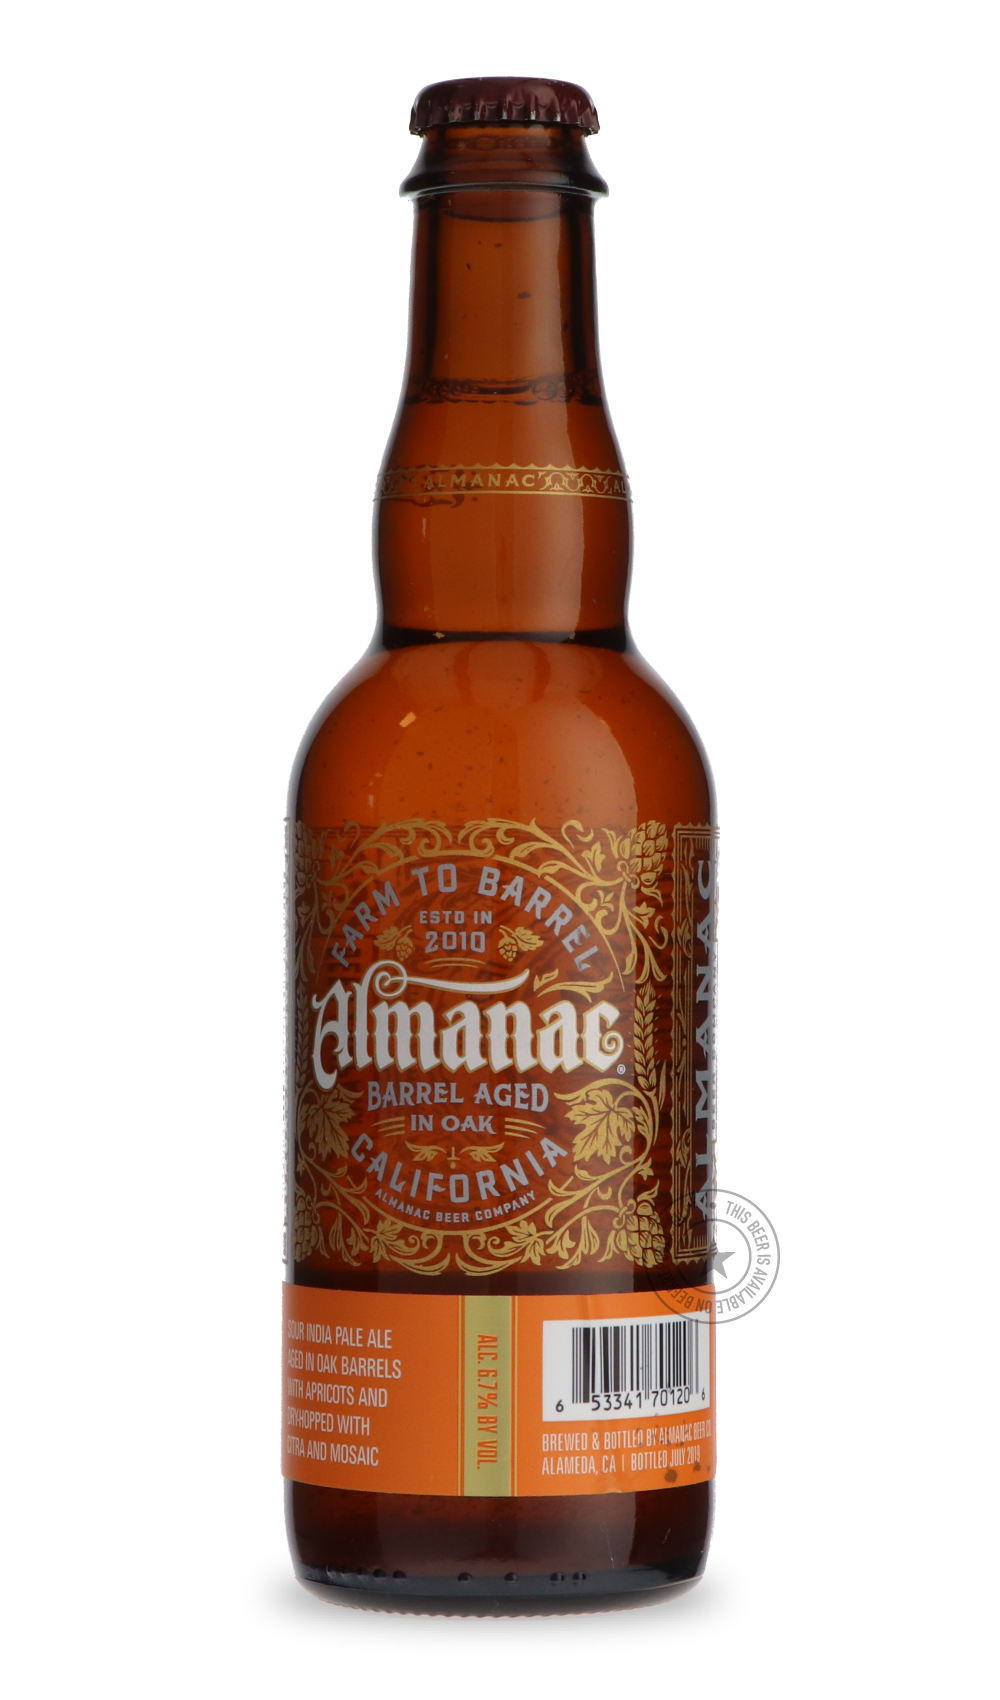 -Almanac- Apricot Hopcake-IPA- Only @ Beer Republic - The best online beer store for American & Canadian craft beer - Buy beer online from the USA and Canada - Bier online kopen - Amerikaans bier kopen - Craft beer store - Craft beer kopen - Amerikanisch bier kaufen - Bier online kaufen - Acheter biere online - IPA - Stout - Porter - New England IPA - Hazy IPA - Imperial Stout - Barrel Aged - Barrel Aged Imperial Stout - Brown - Dark beer - Blond - Blonde - Pilsner - Lager - Wheat - Weizen - Amber - Barley 